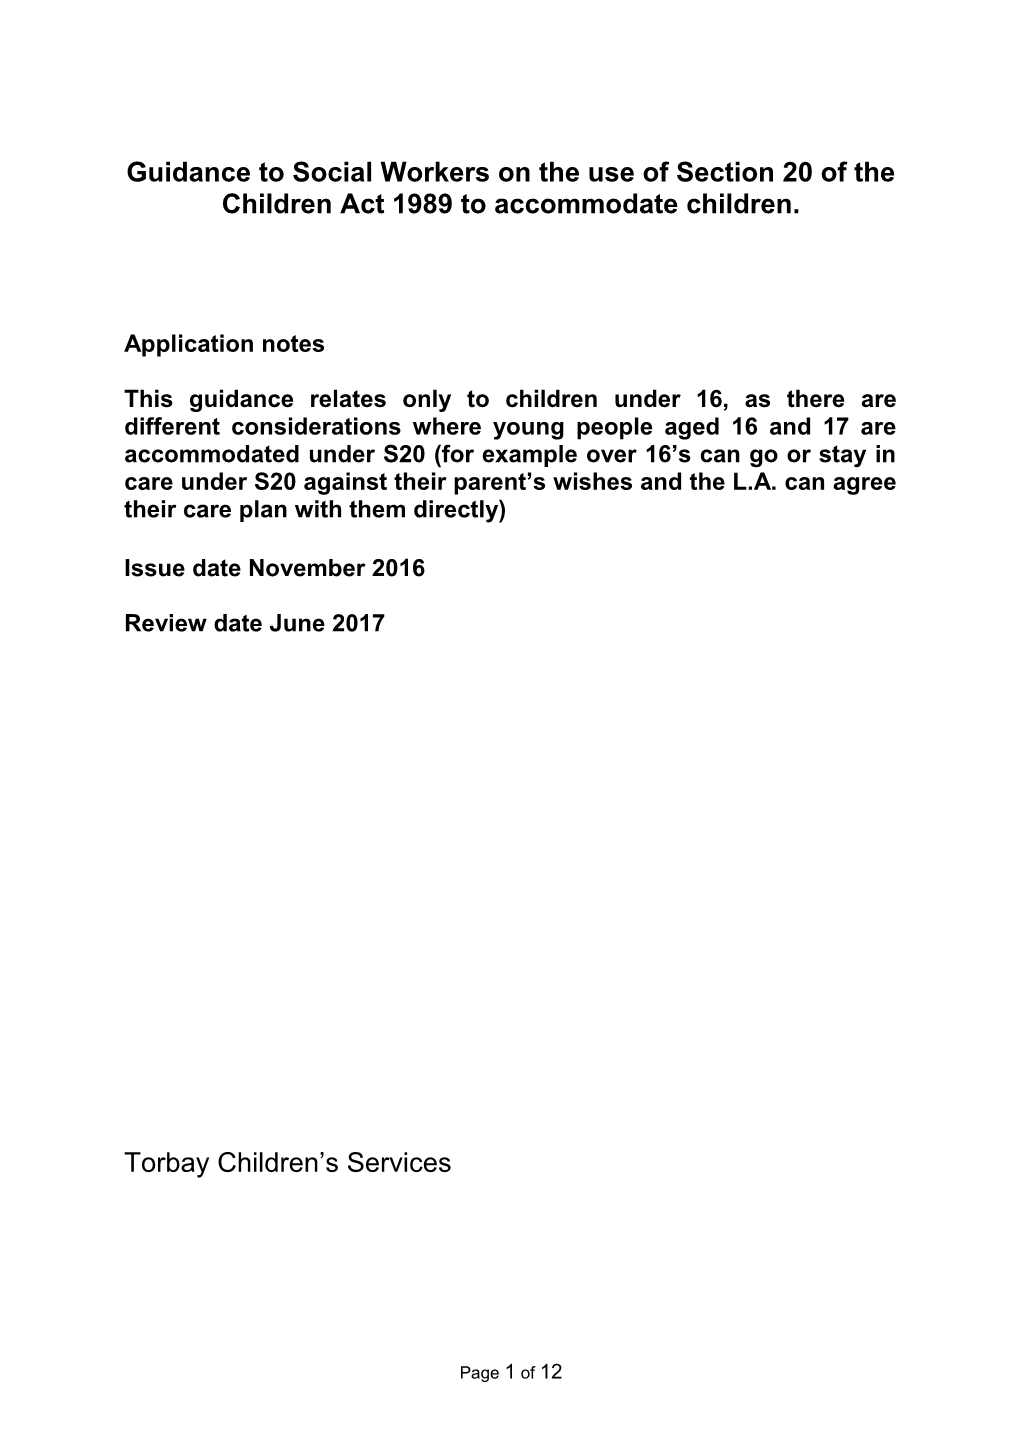 Guidance to Social Workers on the Use of Section 20 of the Children Act 1989 to Accommodate